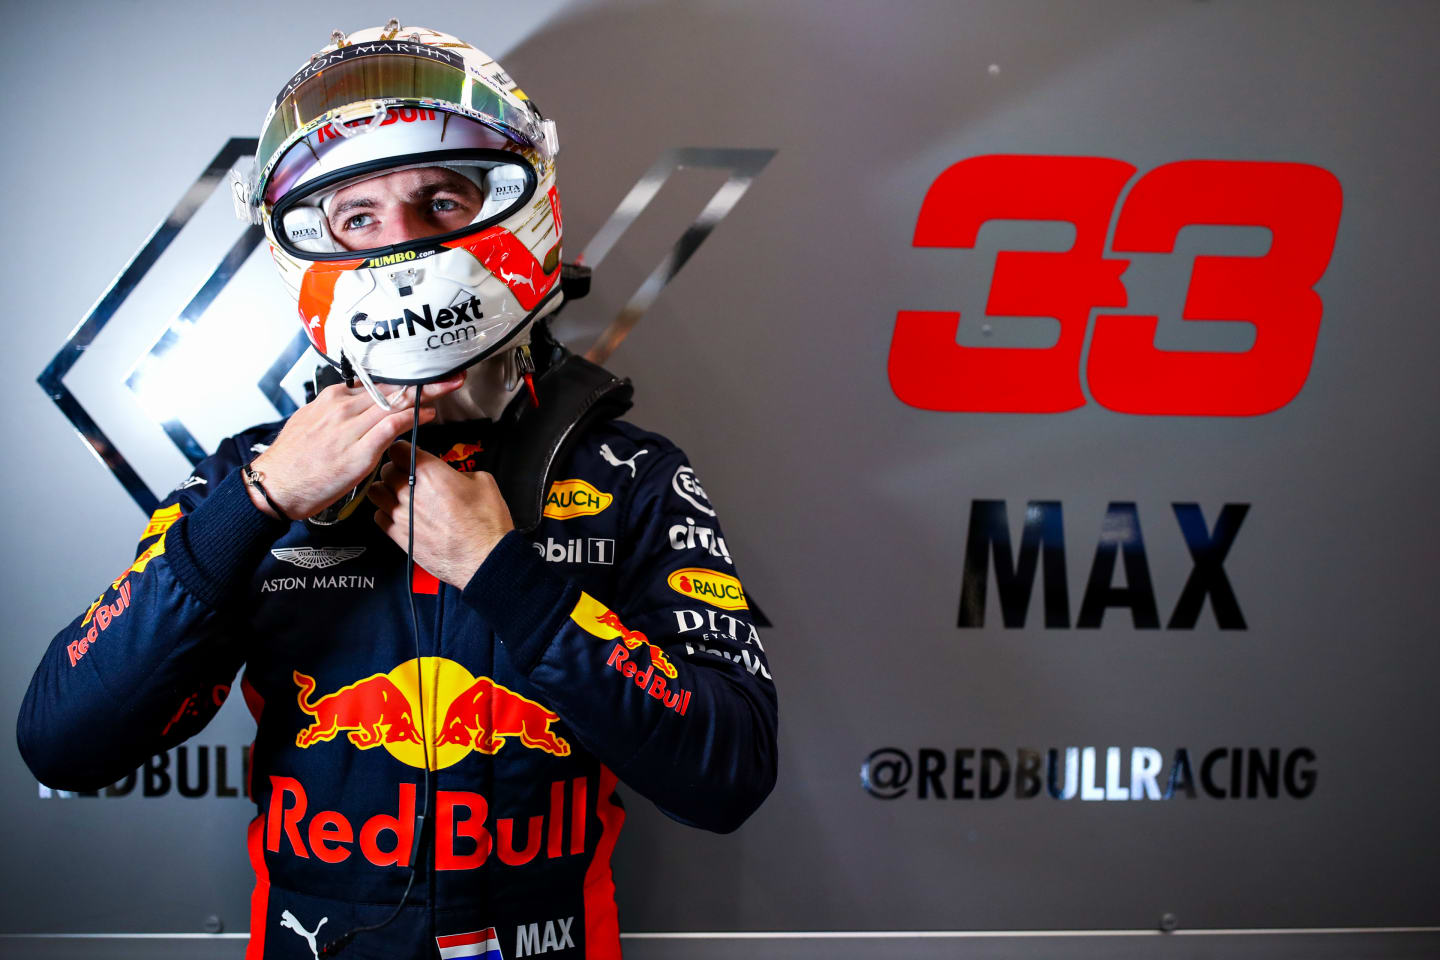 SPA, BELGIUM - AUGUST 29: Max Verstappen of Netherlands and Red Bull Racing prepares to drive in